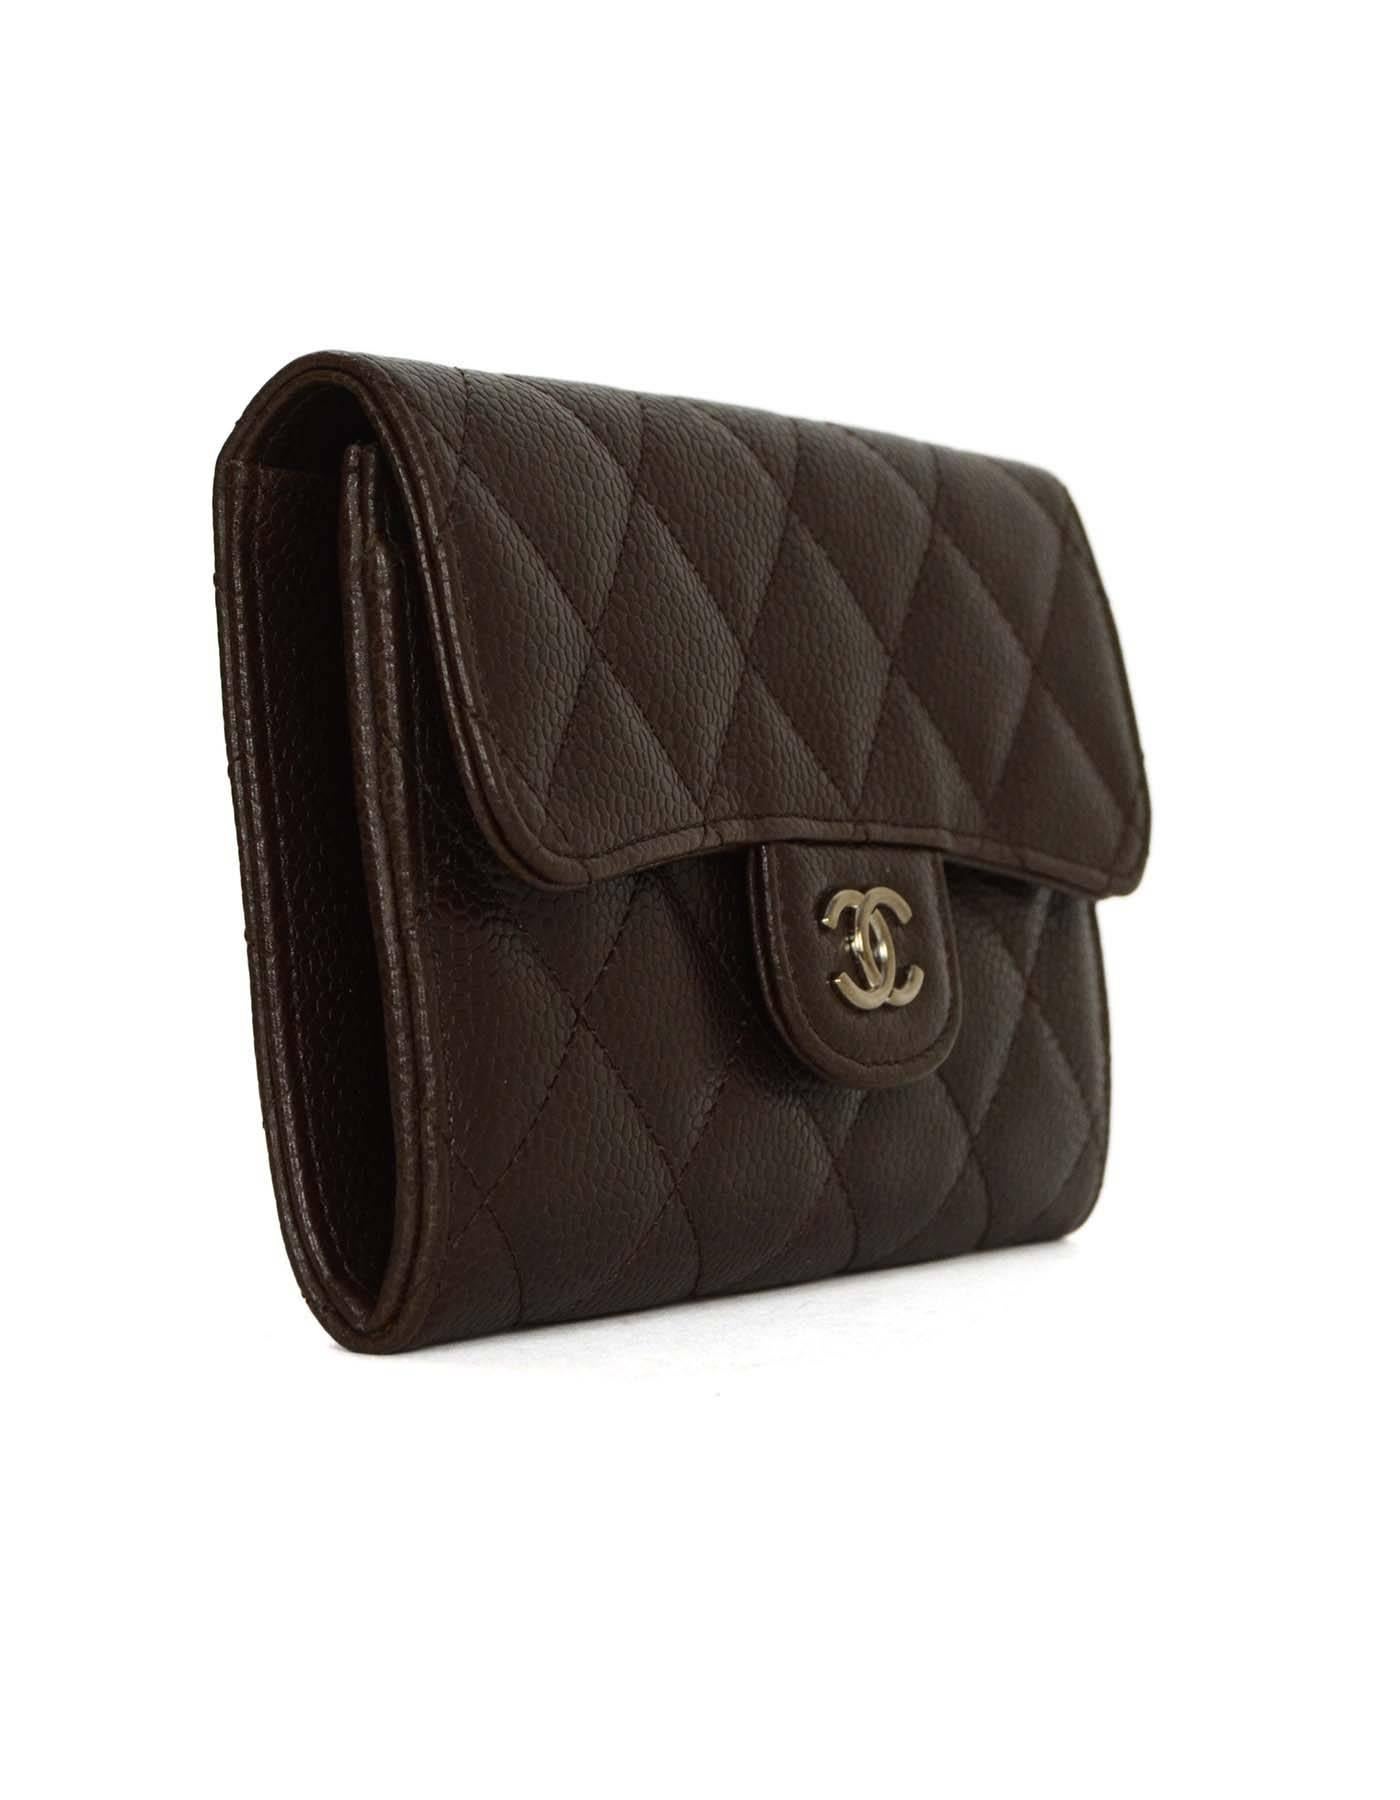 Chanel Brown Quilted Caviar Leather Flap Short Wallet SHW
Features CC logo push button closure

Made in: France
Year of Production: 2008
Color: Brown and silvertone
Hardware: Silvertone
Materials: Leather, textile, and metal
Lining: Brown